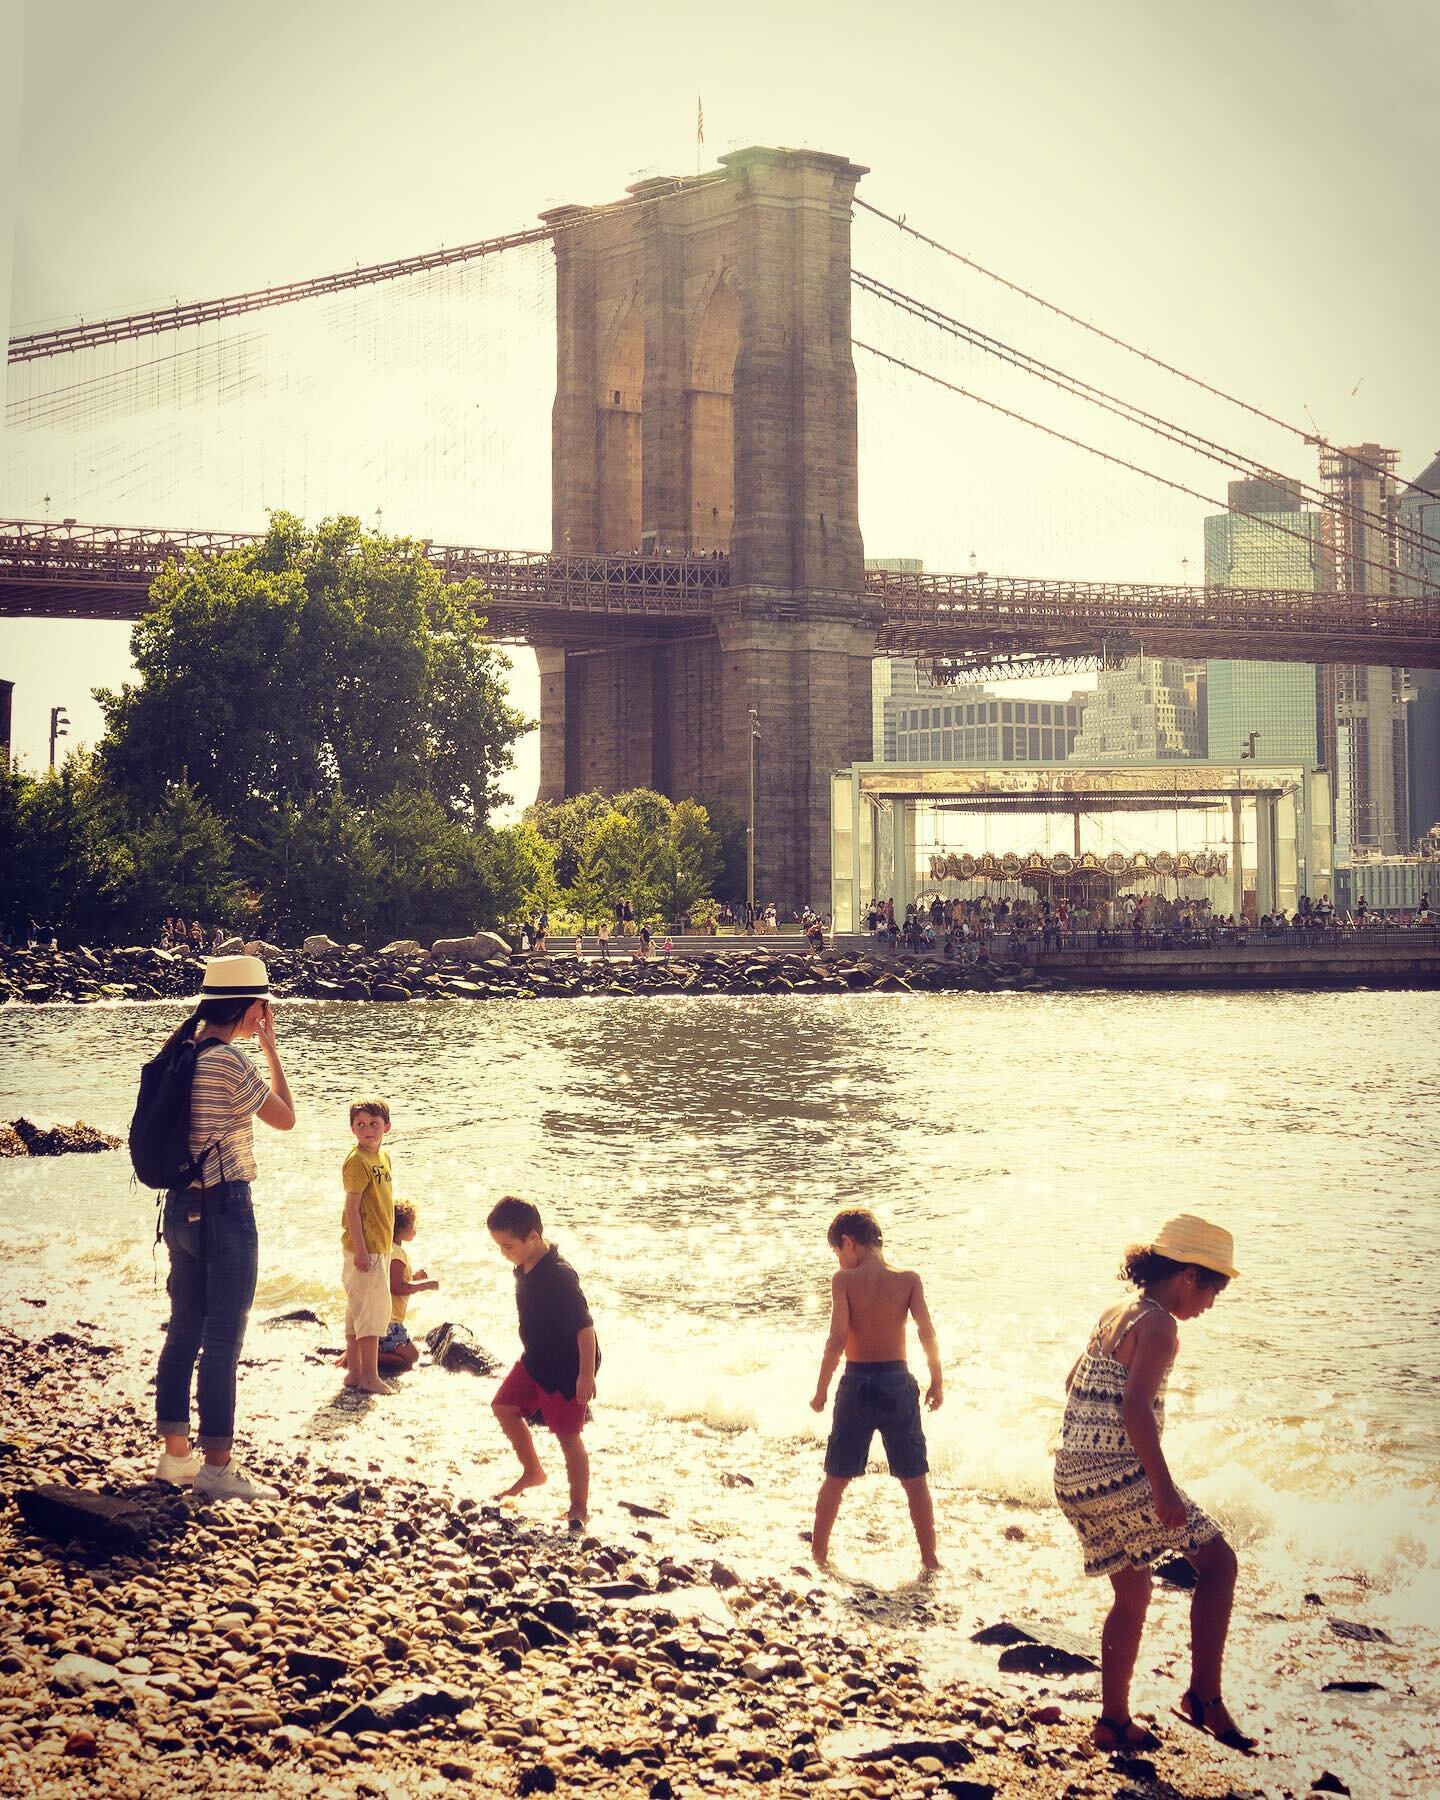 People at the water, Dumbo and Coney Island. NYC. From &ldquo;New York by Neighborhood&rdquo; from @rizzolibooks, released sometime in spring 2021 (hopefully with travel restrictions suspended) #nyc #coneyisland #dumbo #brooklyn #water #seaside #peop